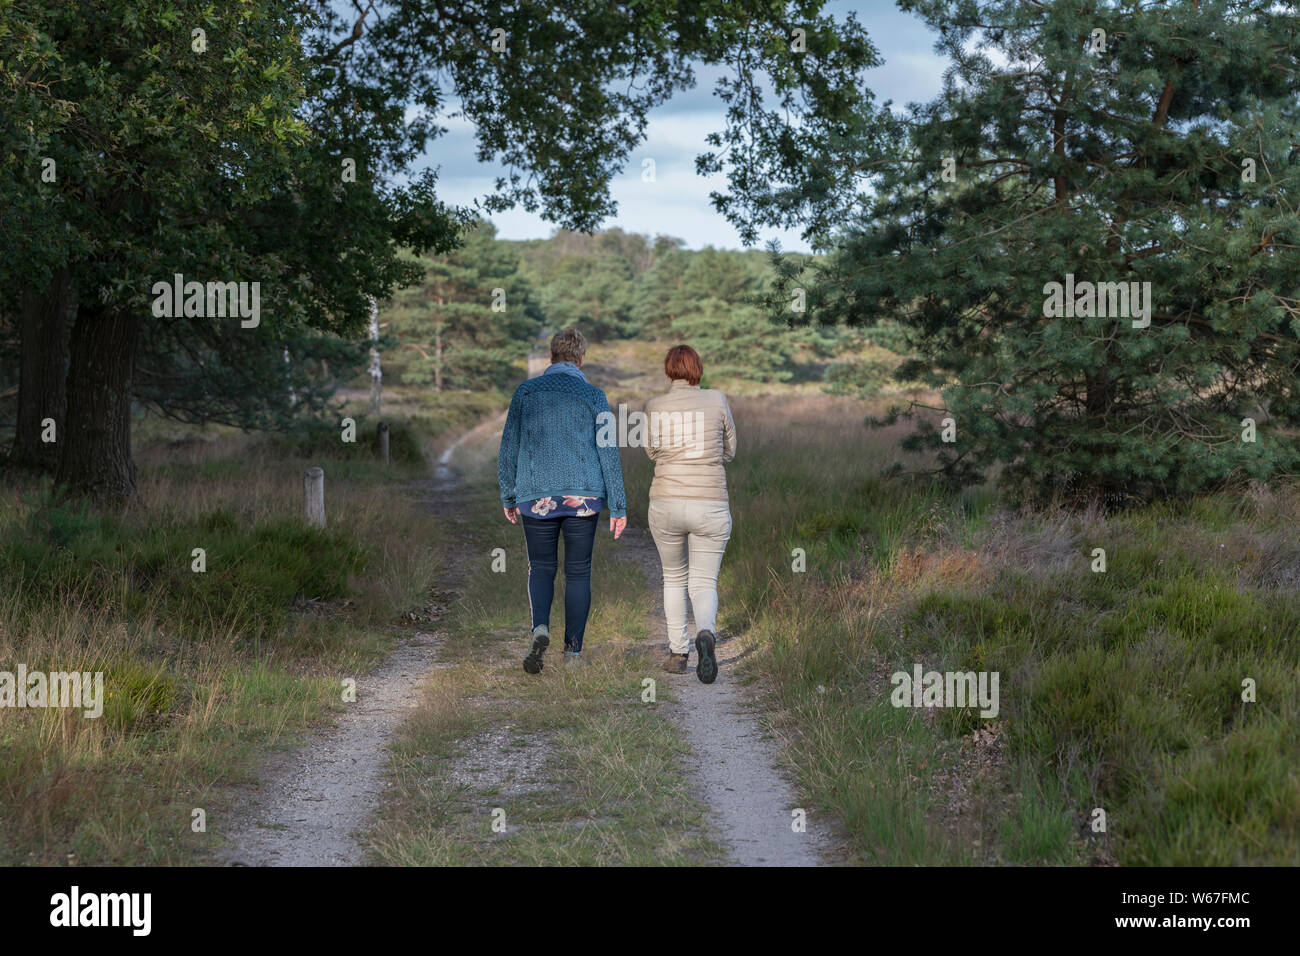 Garderen,Holland,15-july-2019:two woman walking in the national park the hooge veluwe in holland, the park is famous of its wildlife as deer and wild pigs Stock Photo